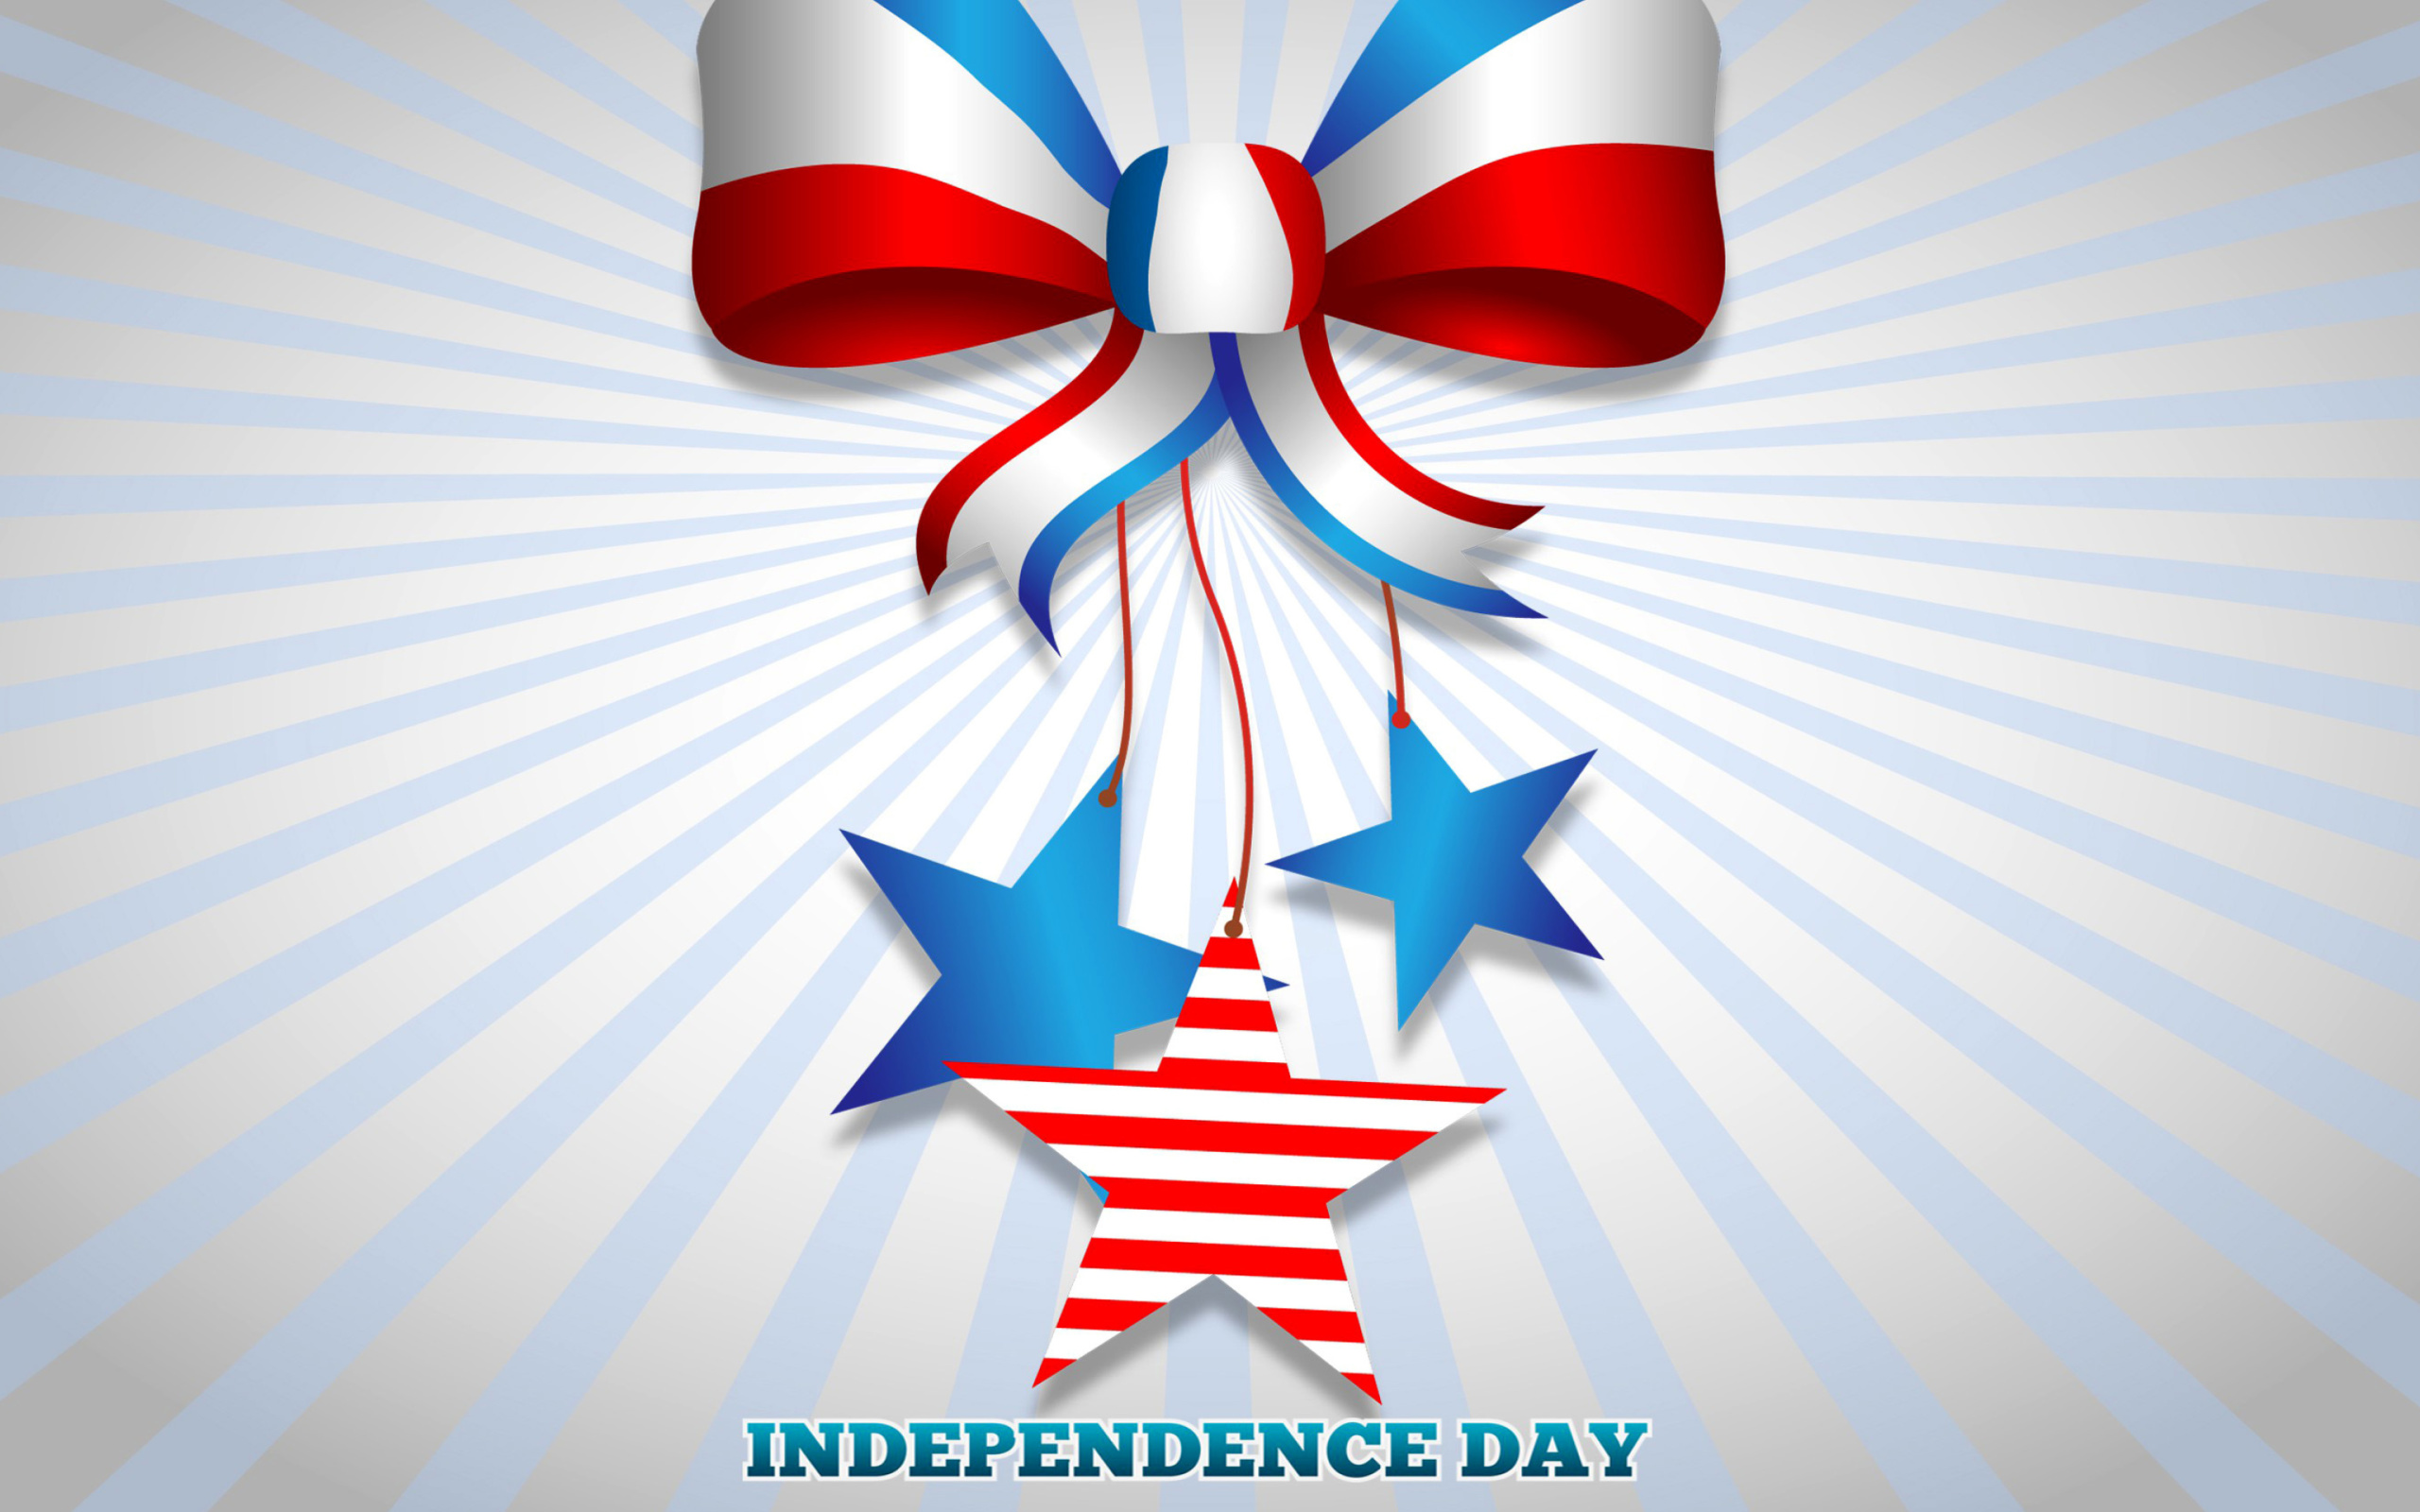 Das United states america Idependence day 4th july Wallpaper 2560x1600